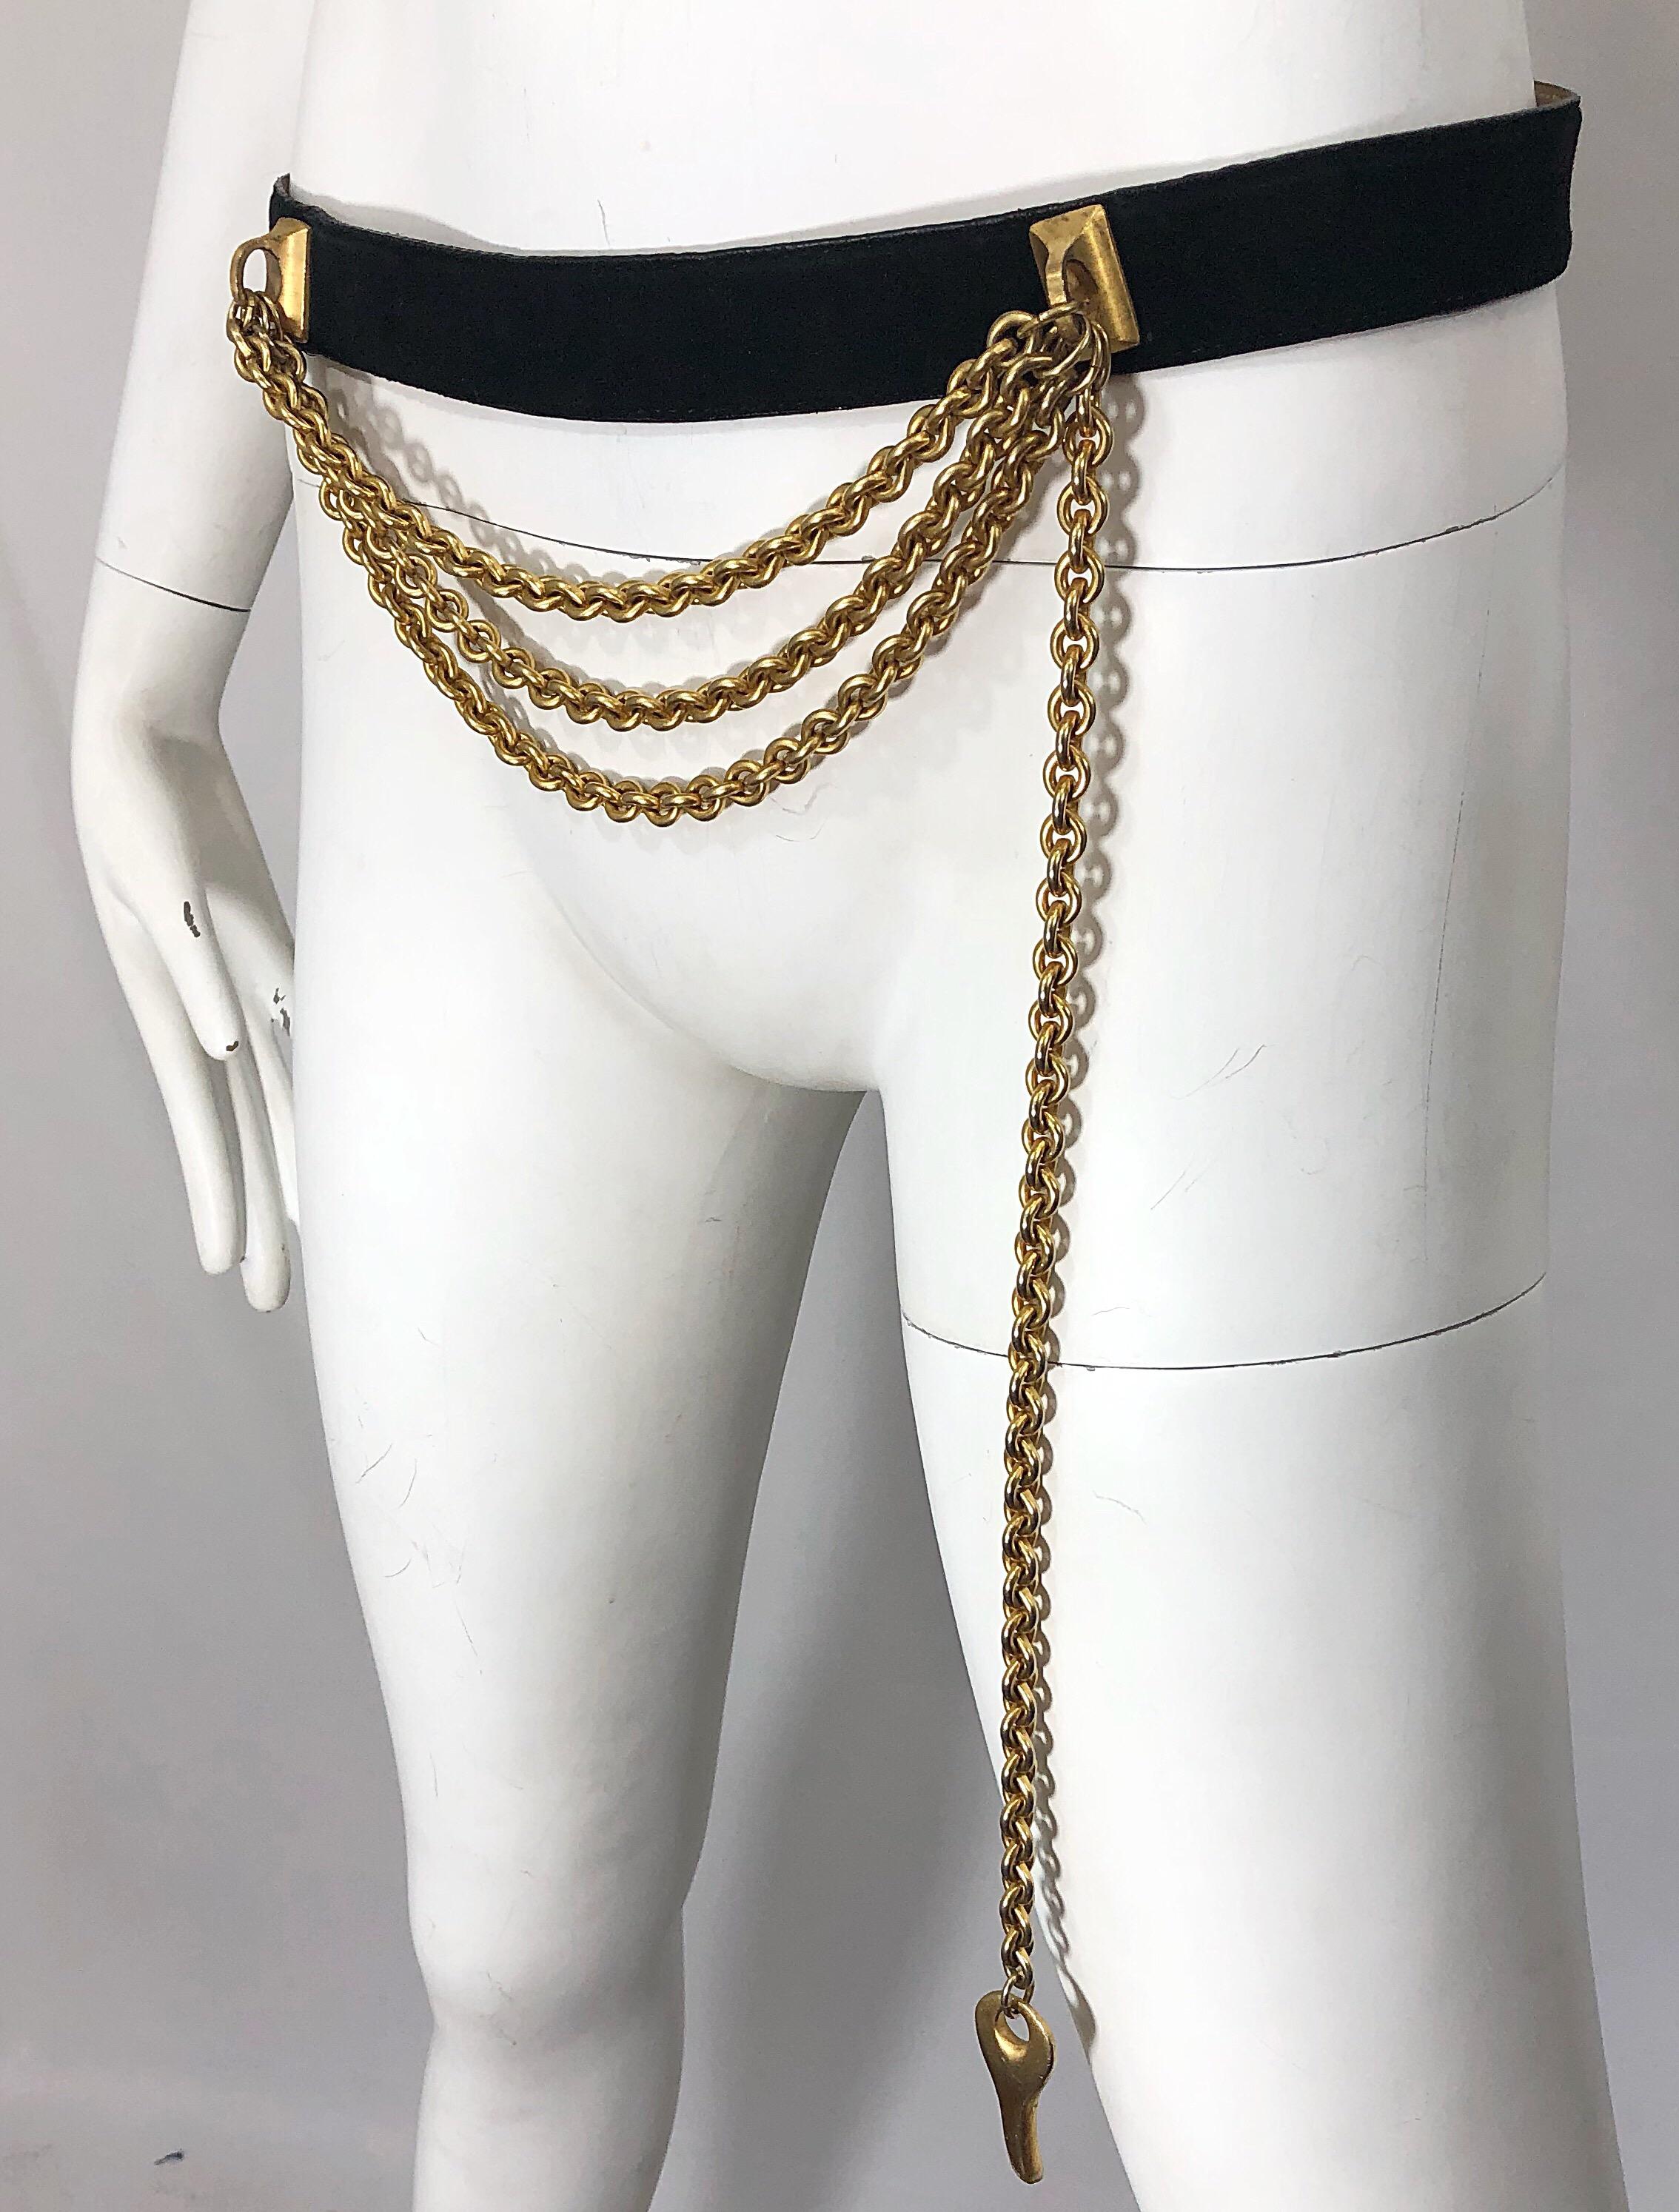 Women's 1990s Donna Karan Black Leather Suede and Gold Chain Vintage 90s Key Belt